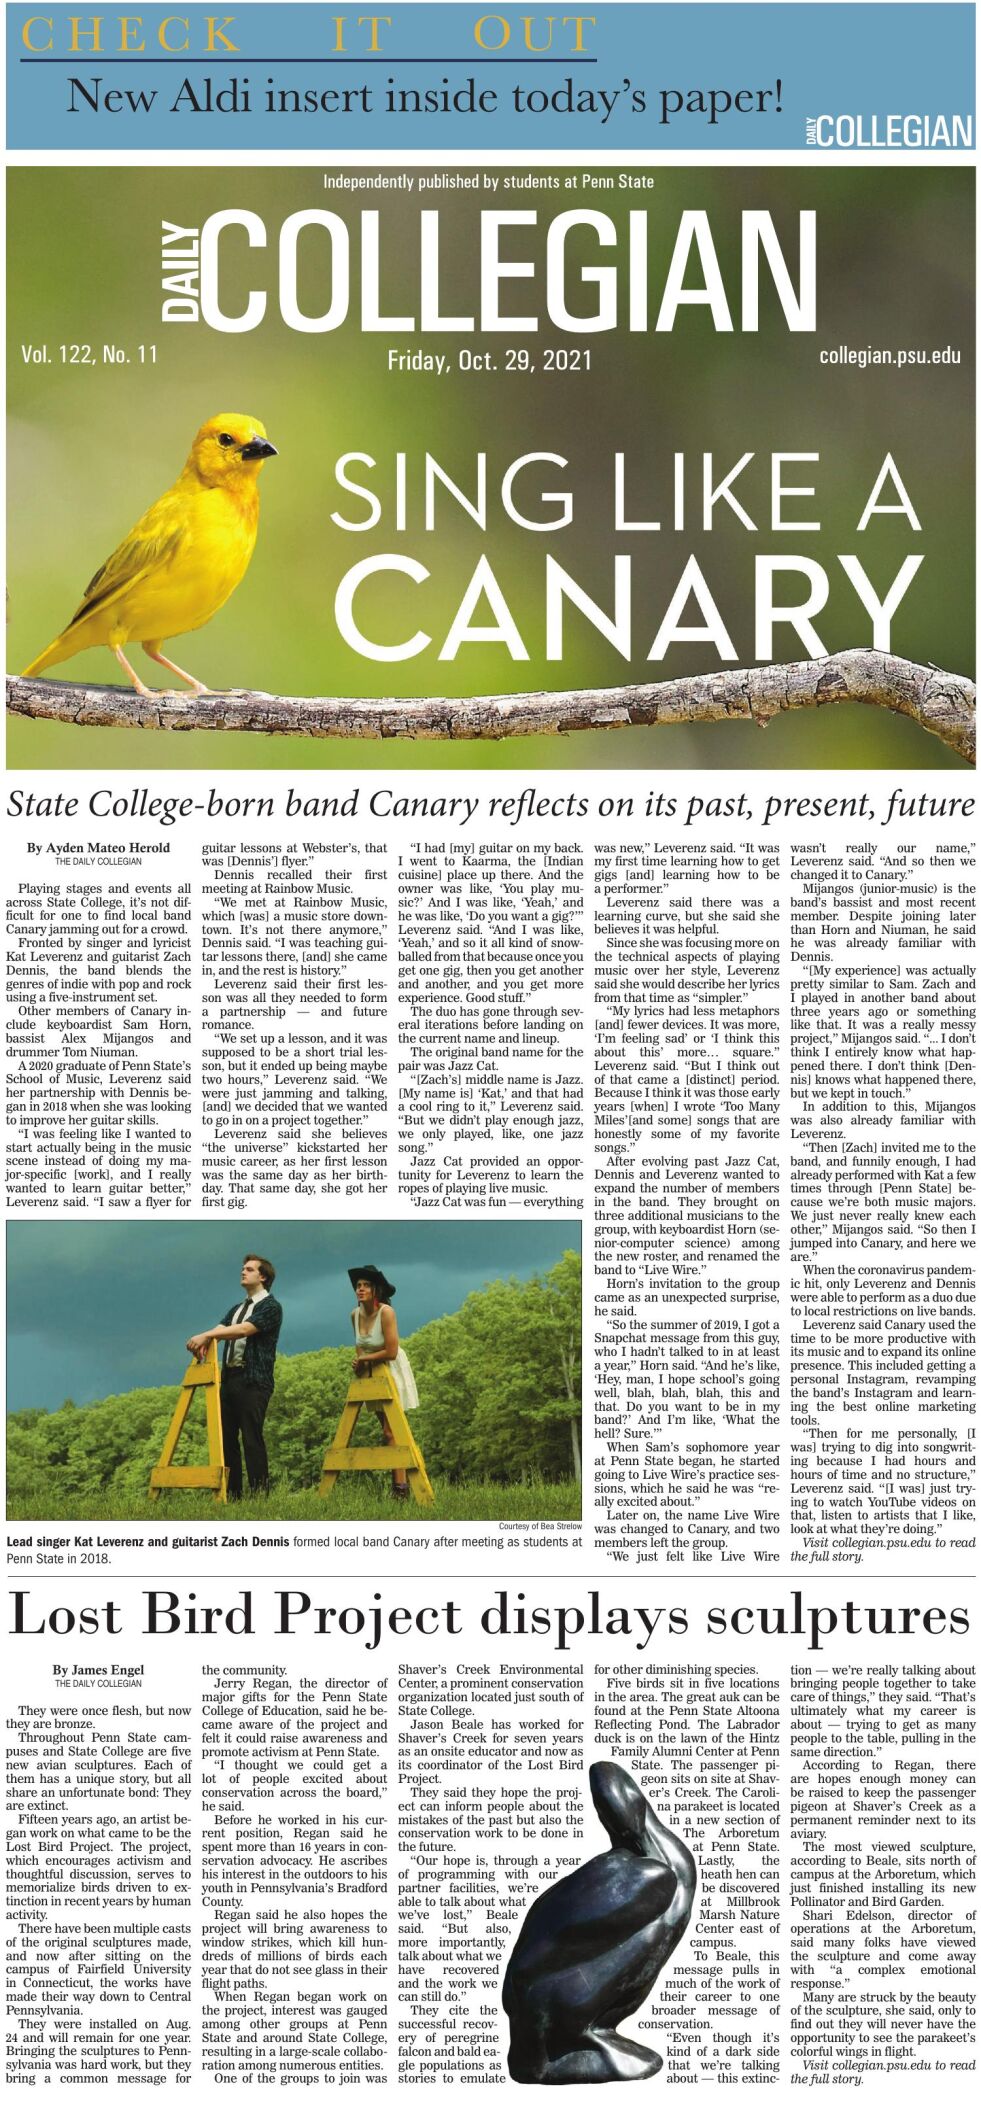 The Daily Collegian for Oct. 29, 2021